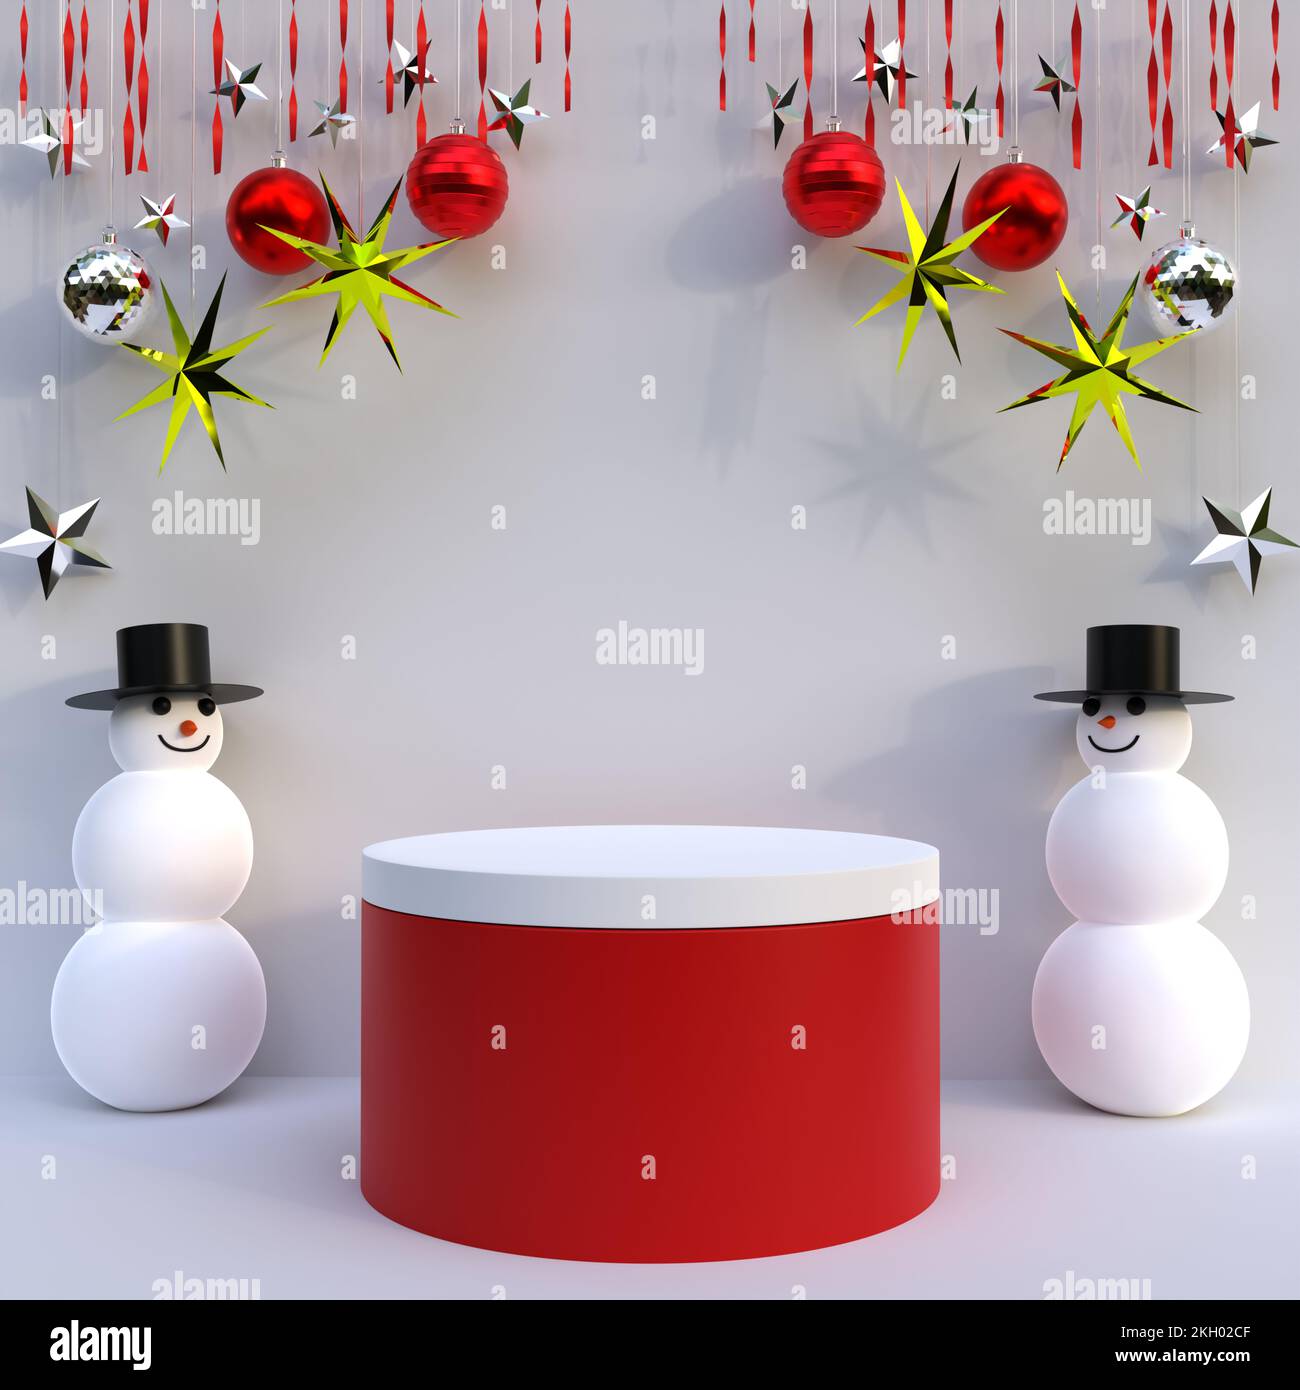 beautiful white platform backdrop for Christmas festival 3d illustration, decorative concept design for Christmas product presentation or product Stock Photo